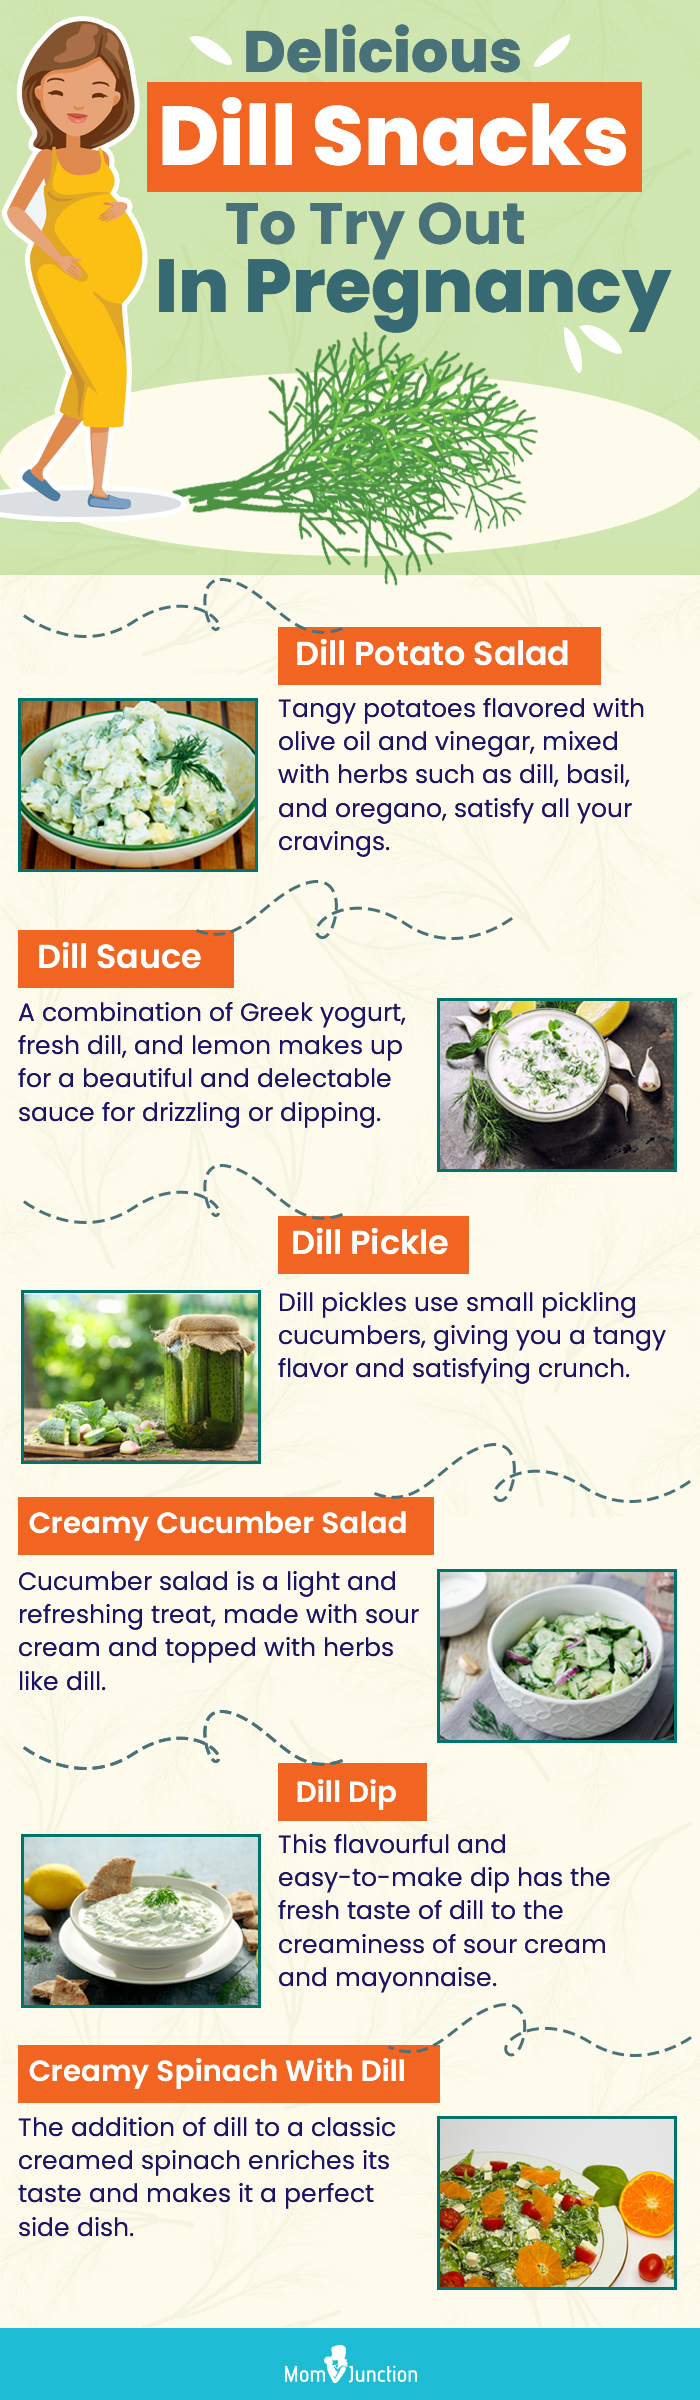 delicious dill snacks to try out in pregnancy (infographic)